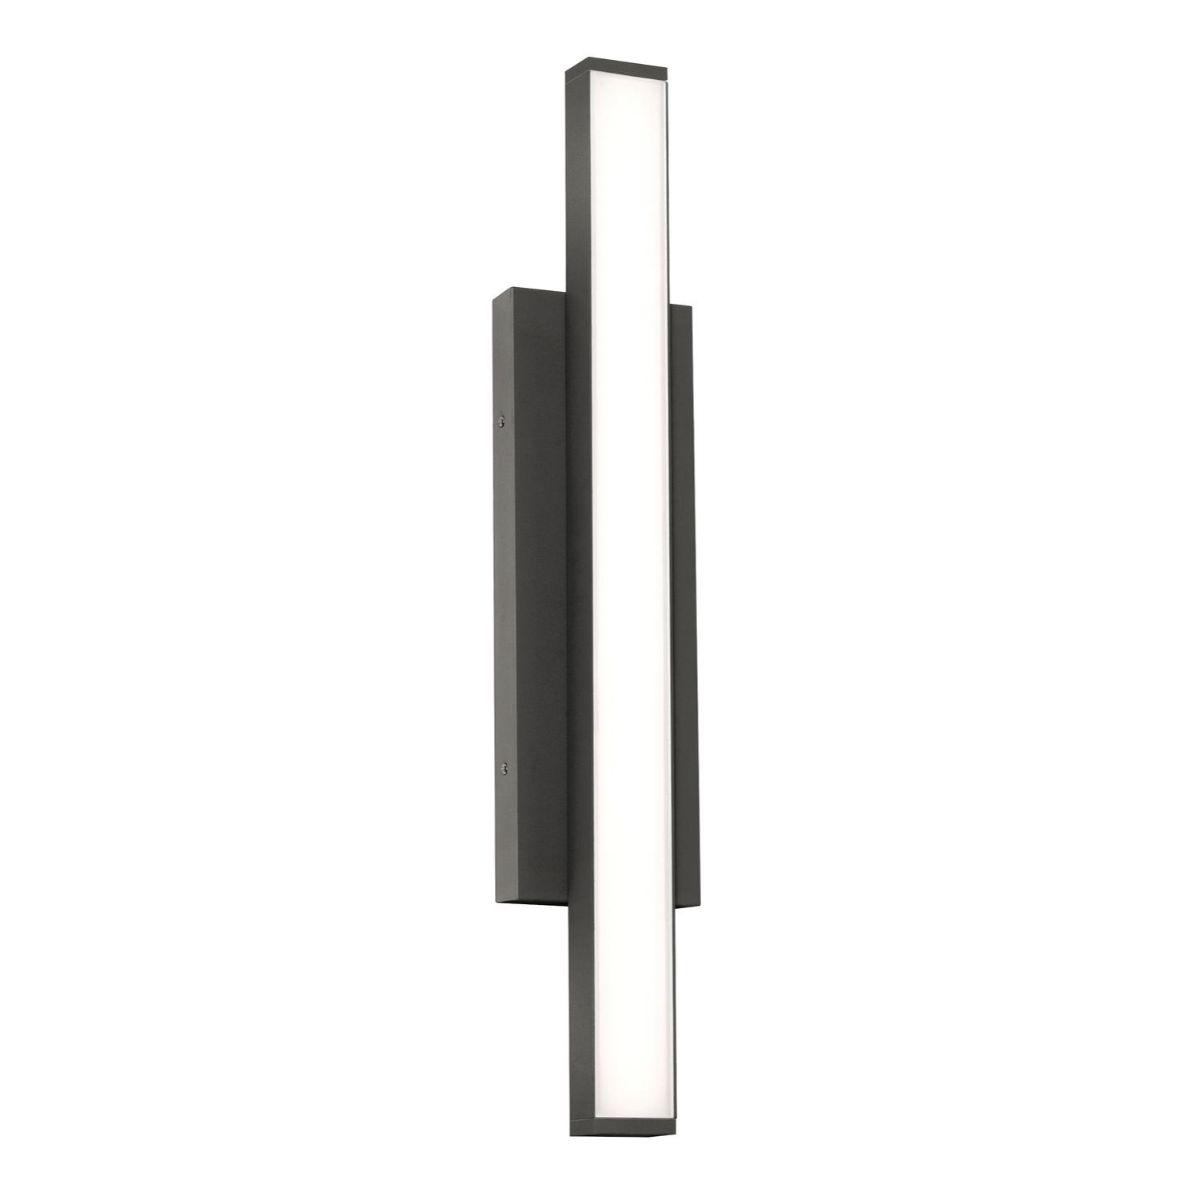 Gale 24 in. LED Outdoor Wall Sconce 1000 lumens 3000K Emergency Battery Included